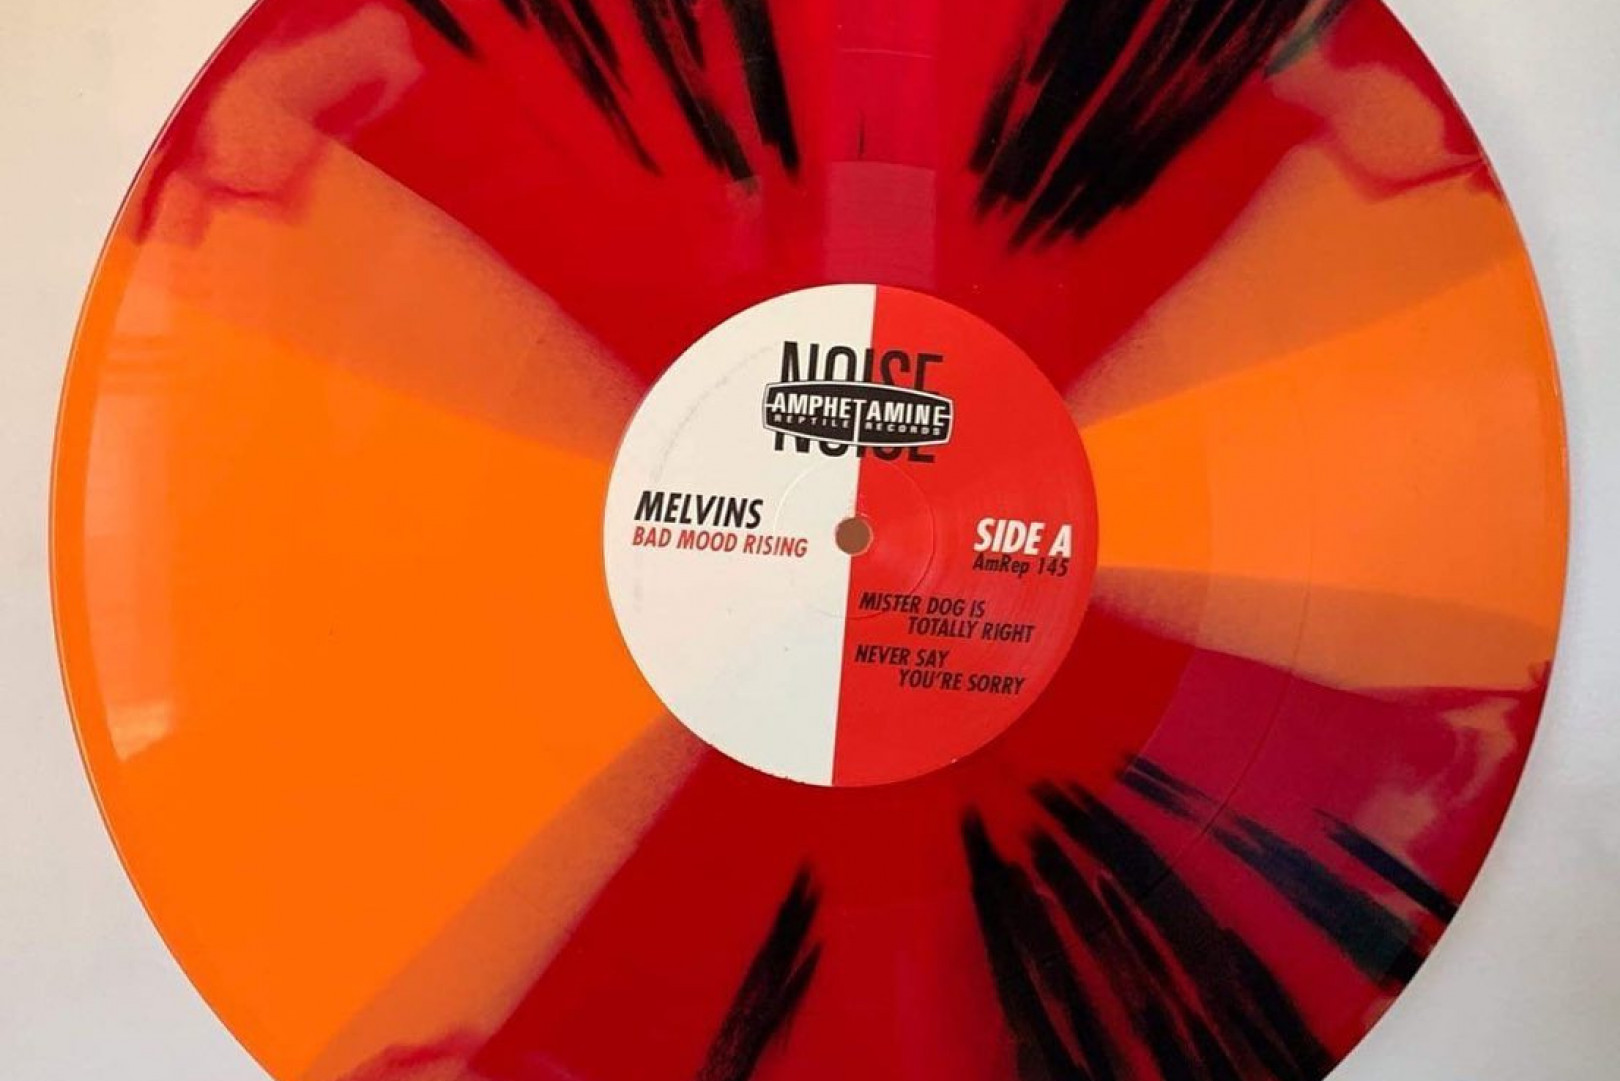 Melvins to release a new Record this August